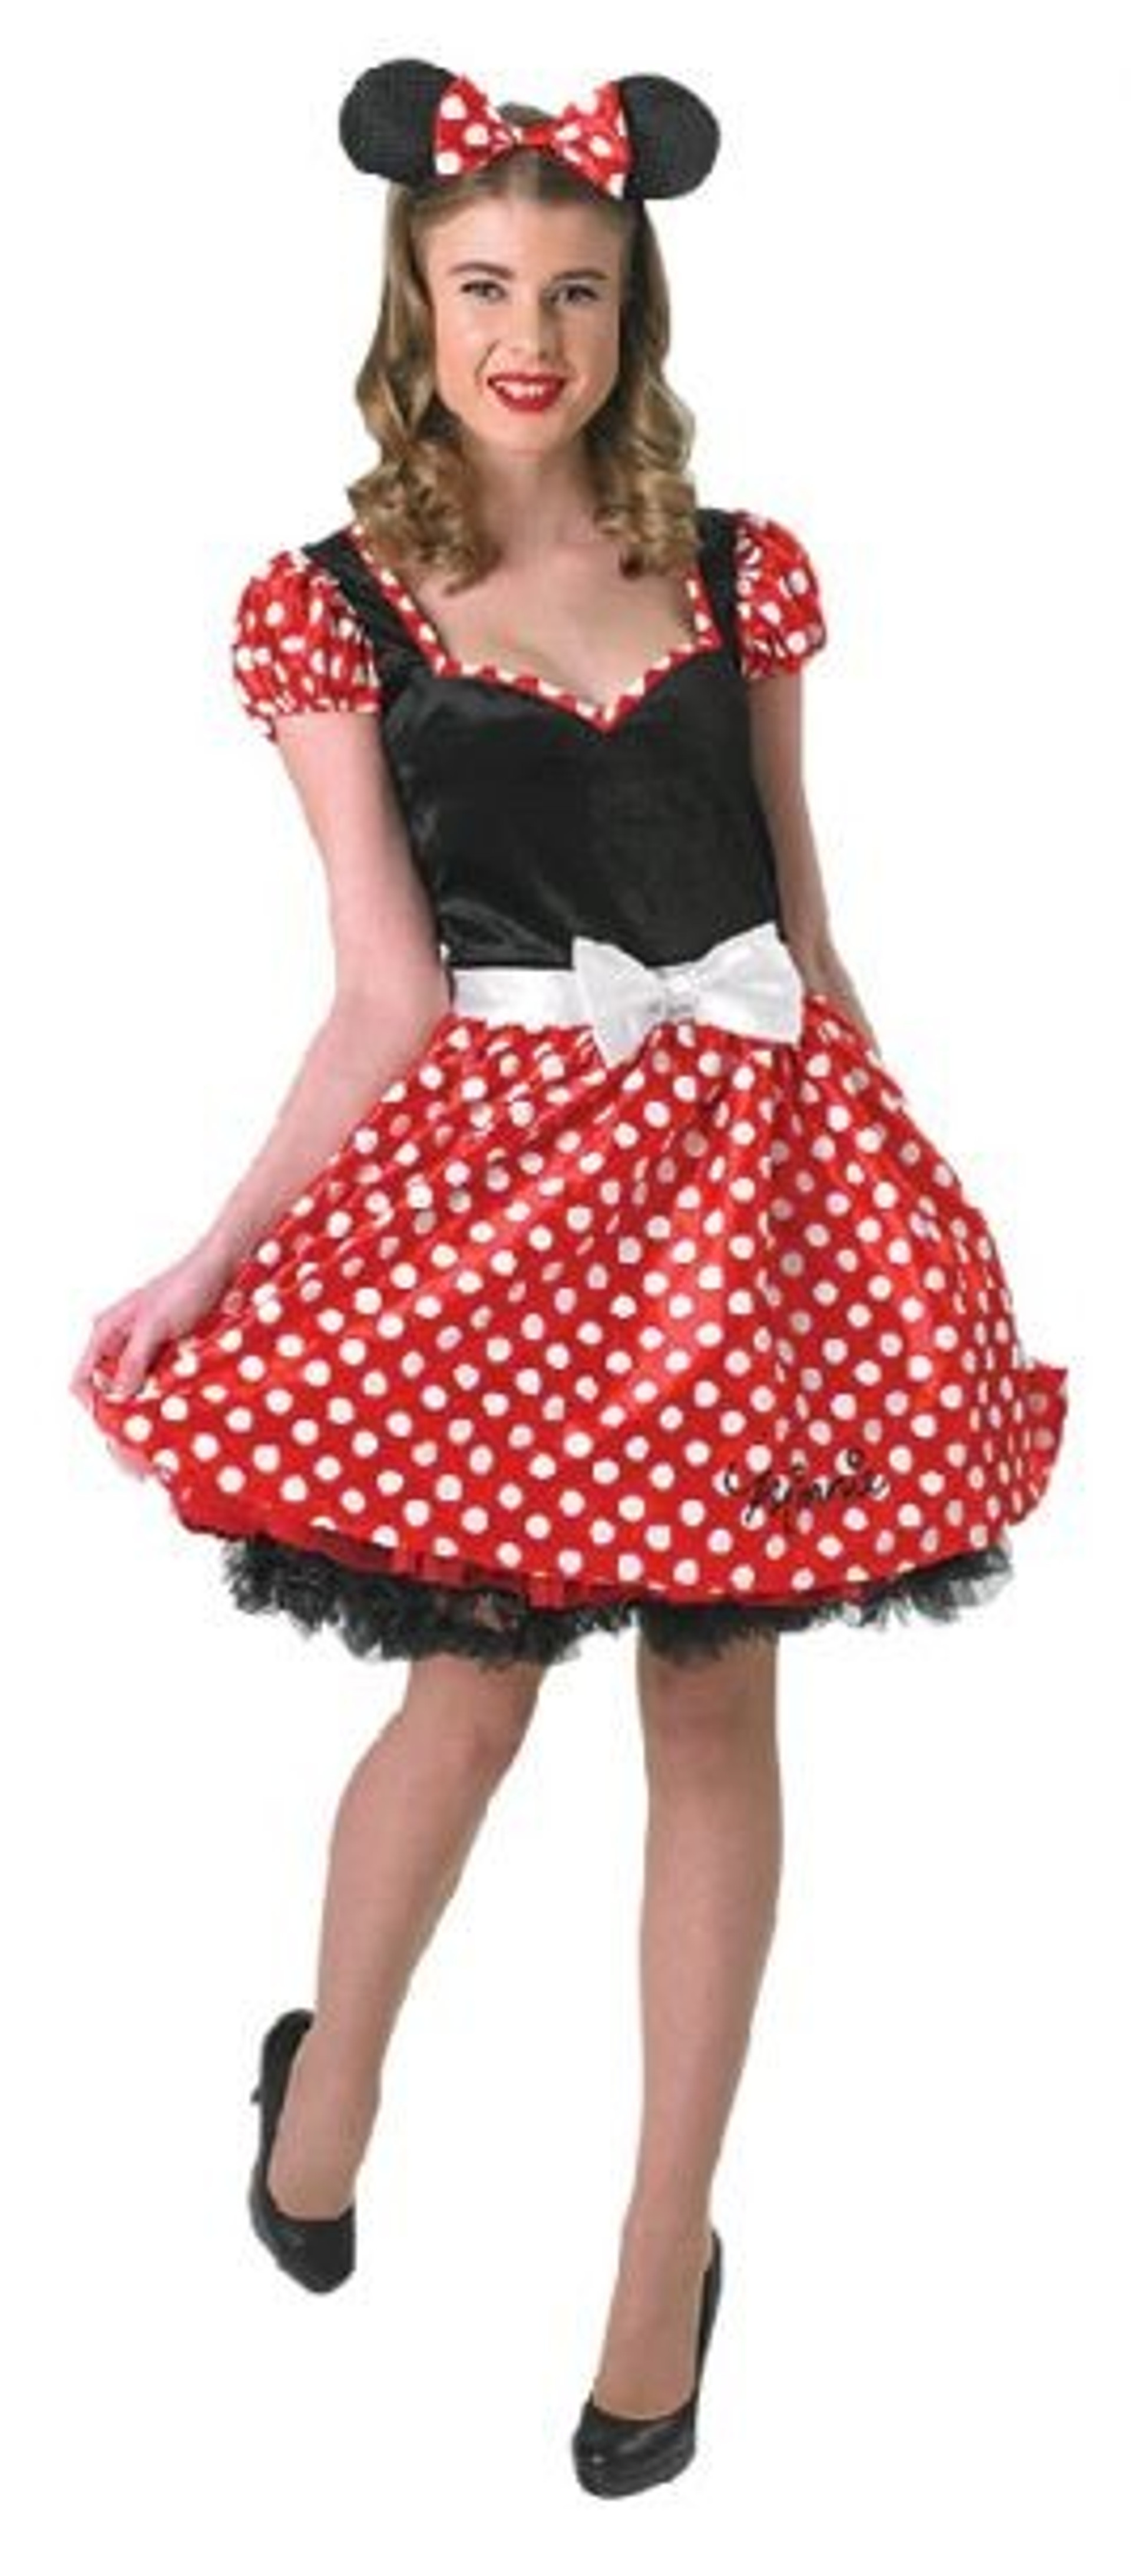 Sassy Minnie Mouse Costume Disney Fancy Dress From Costumes To Buy